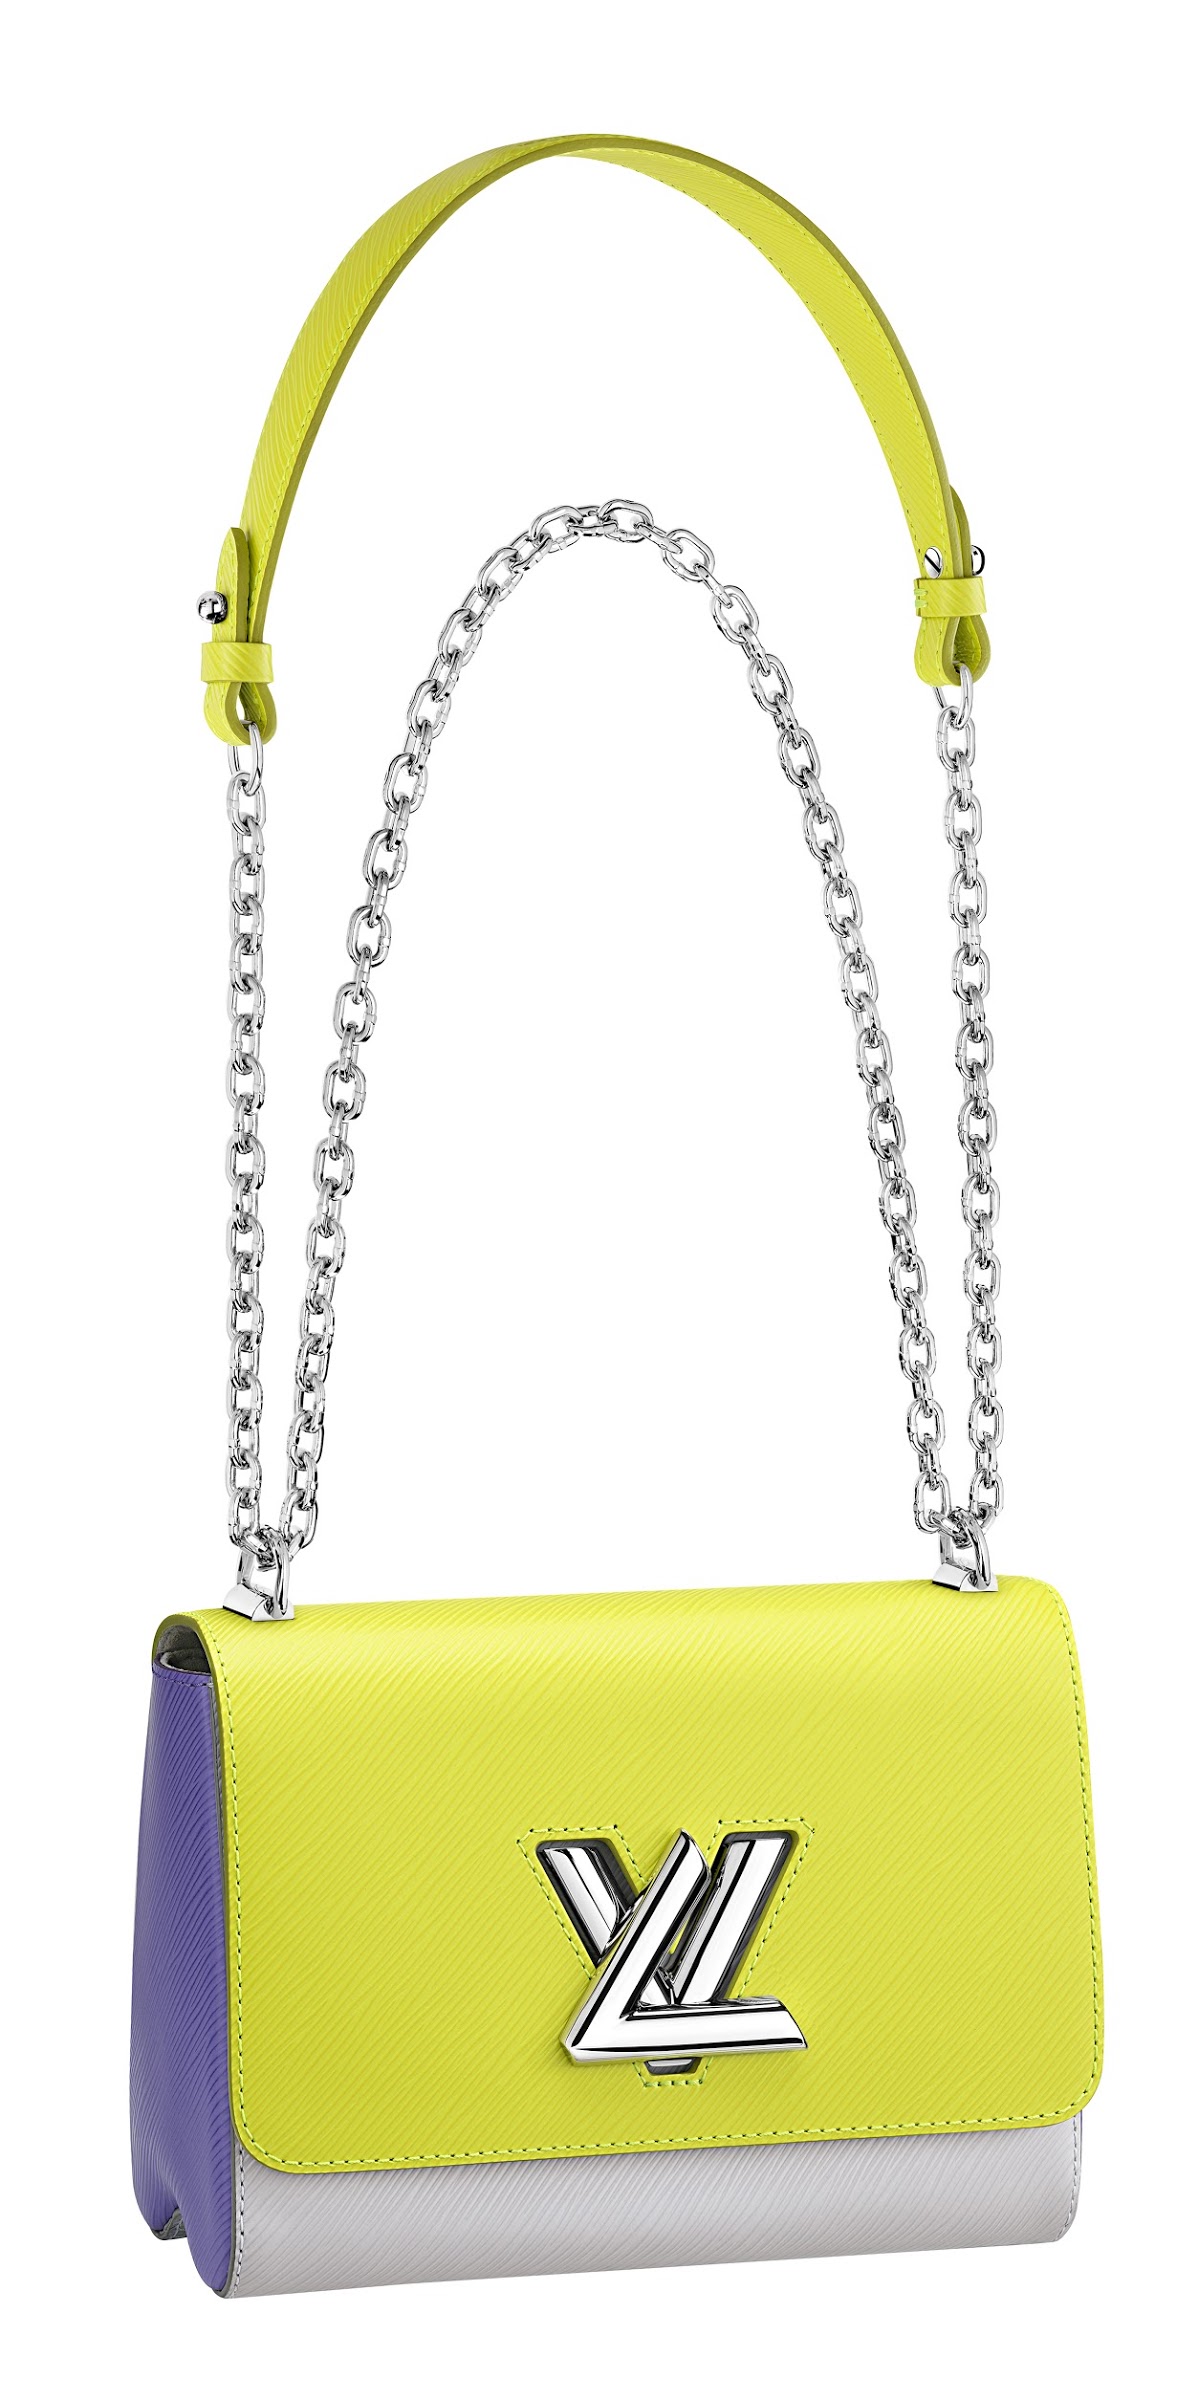 Vuitton Goes Neon for Spring/Summer 16